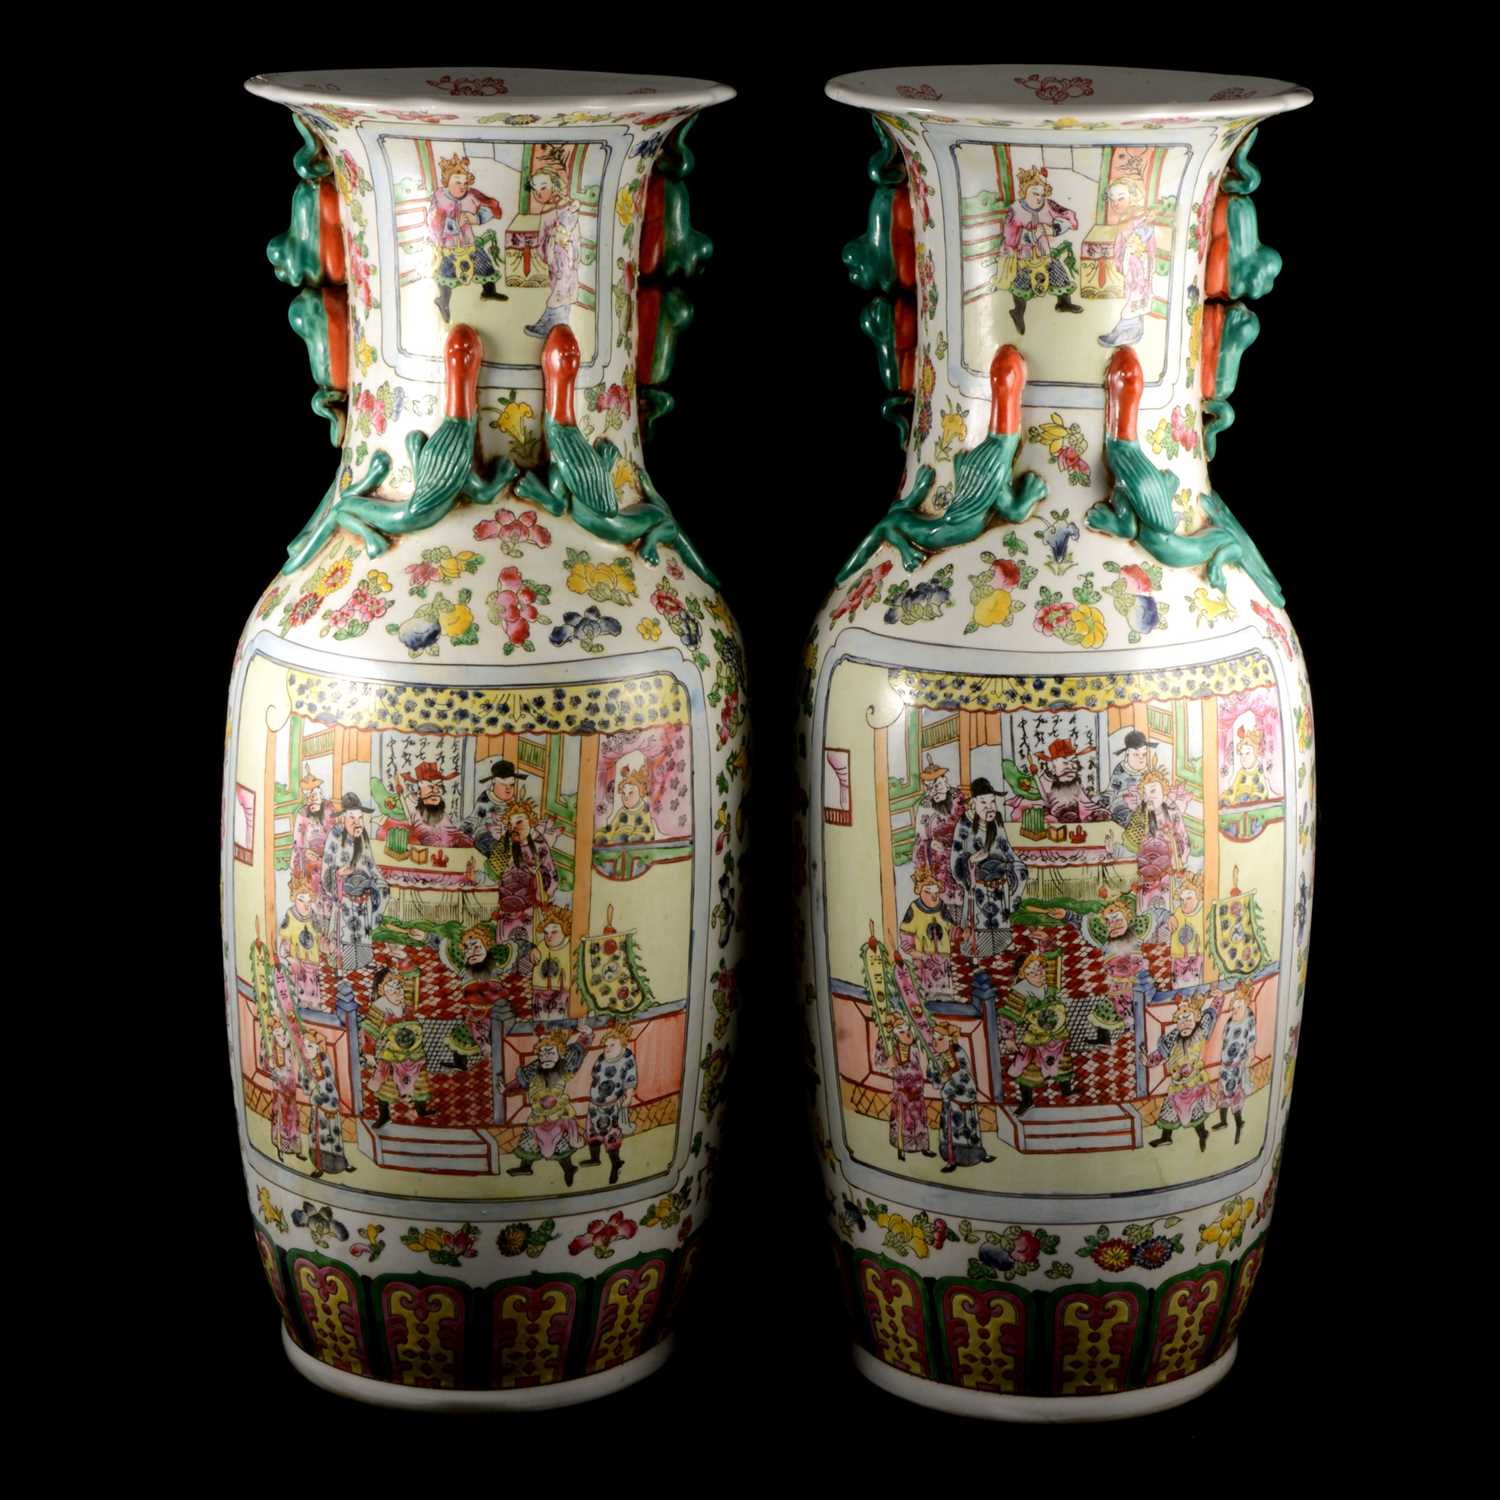 Lot 68 - Pair of floor-standing Chinese polychrome vases, 20th Century